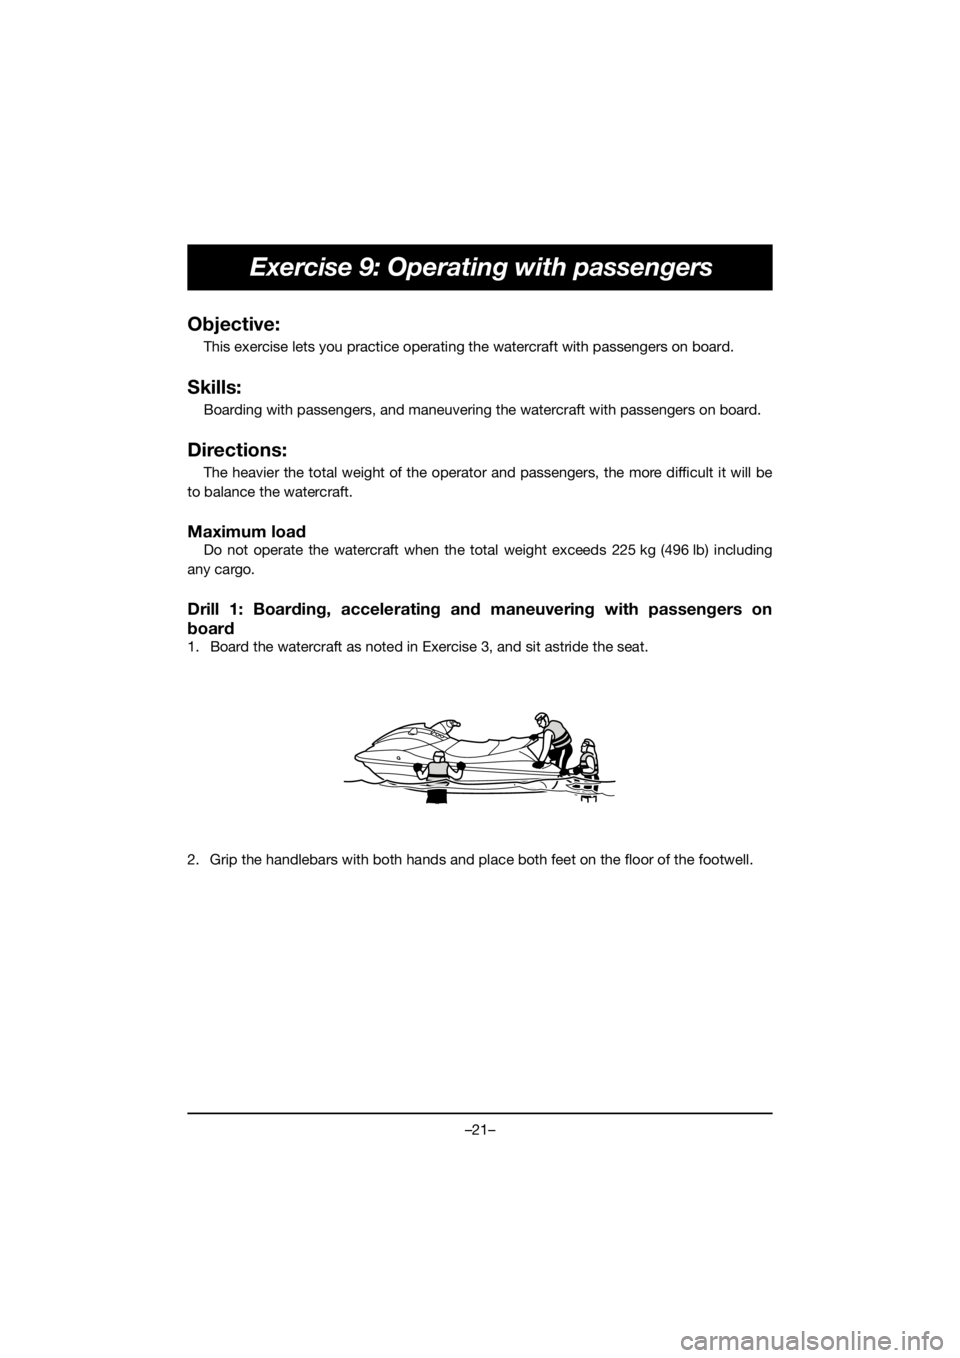 YAMAHA EX 2021  Manuale duso (in Italian) –21–
Exercise 9: Operating with passengers
Objective:
This exercise lets you practice operating the watercraft with passengers on board.
Skills:
Boarding with passengers, and maneuvering the water